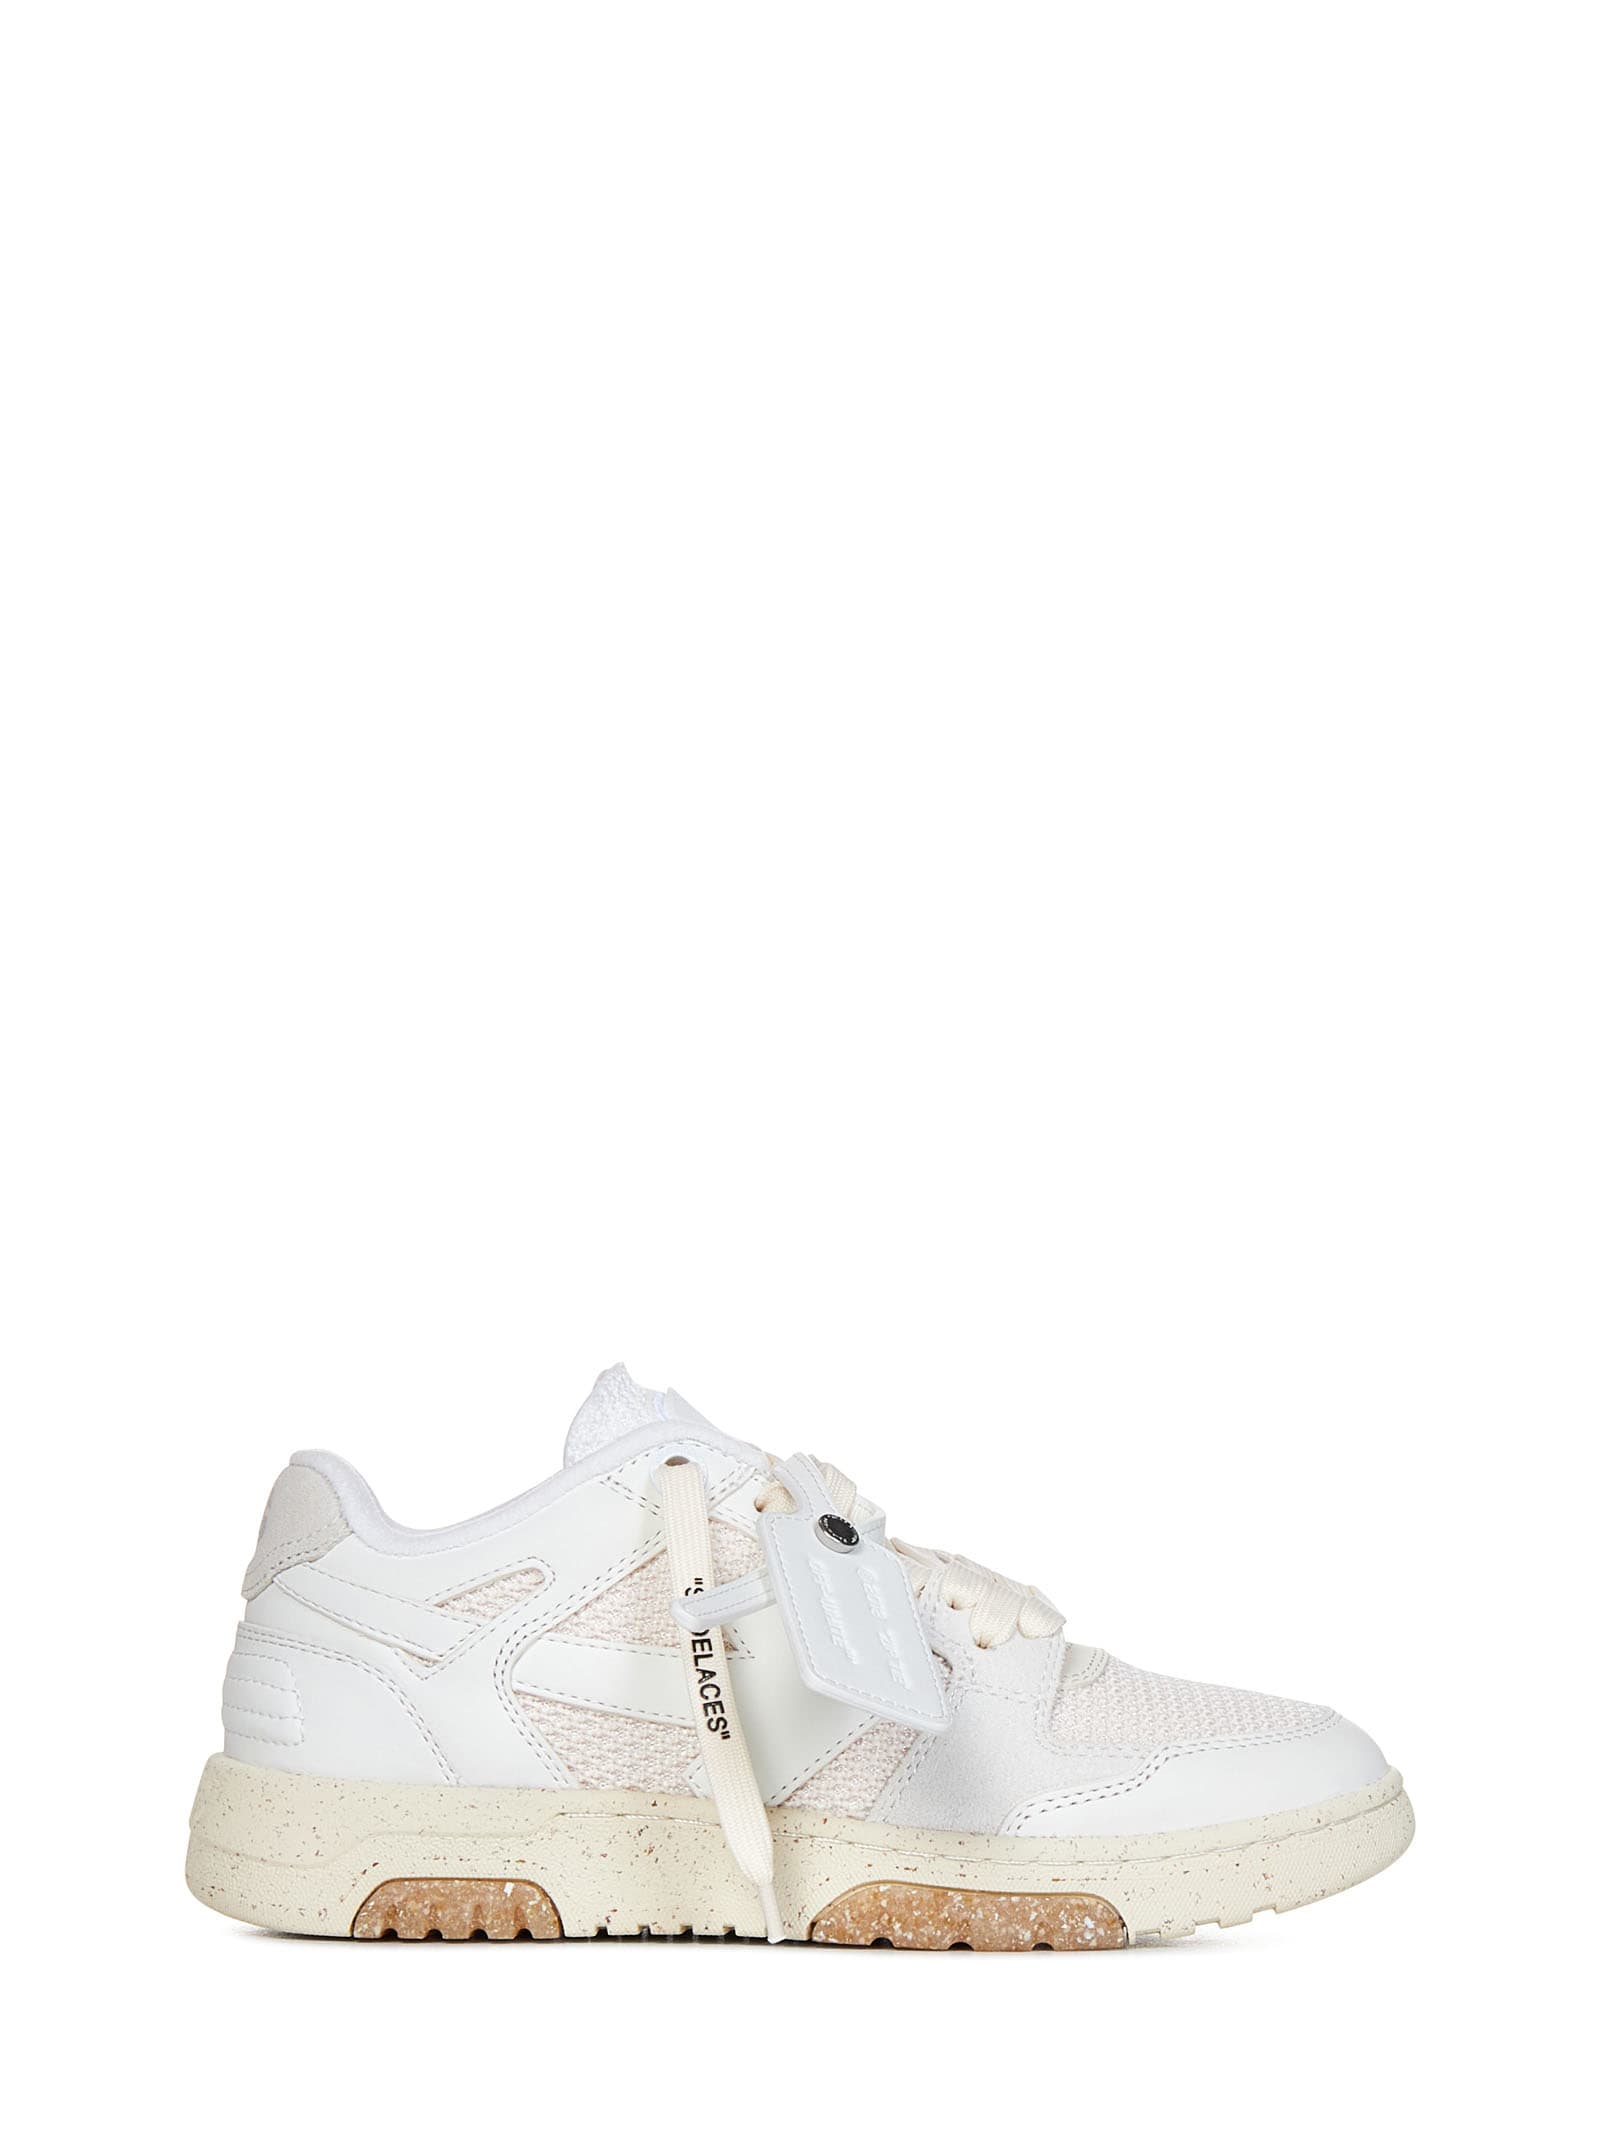 OFF-WHITE OUT OF OFFICE SLIM SNEAKERS